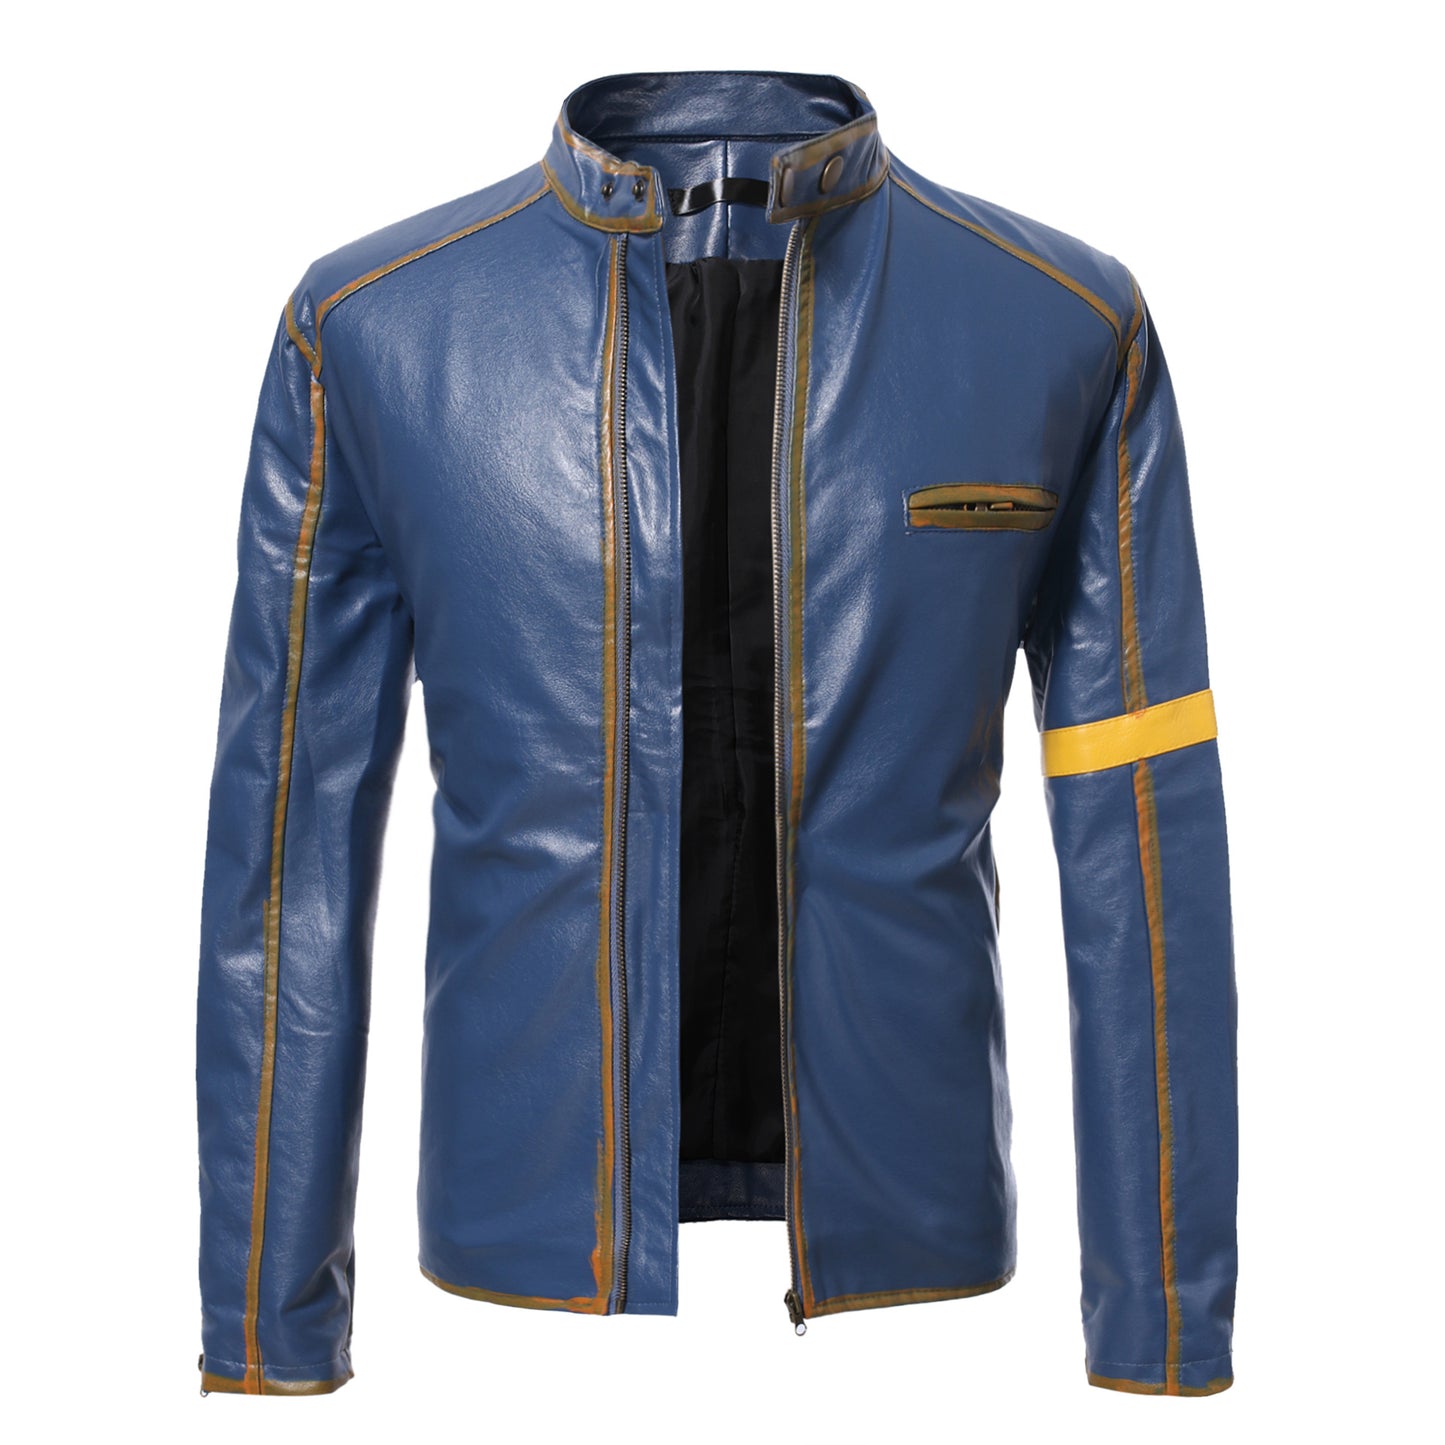 Men's Casual Motorcycle Leather Jacket